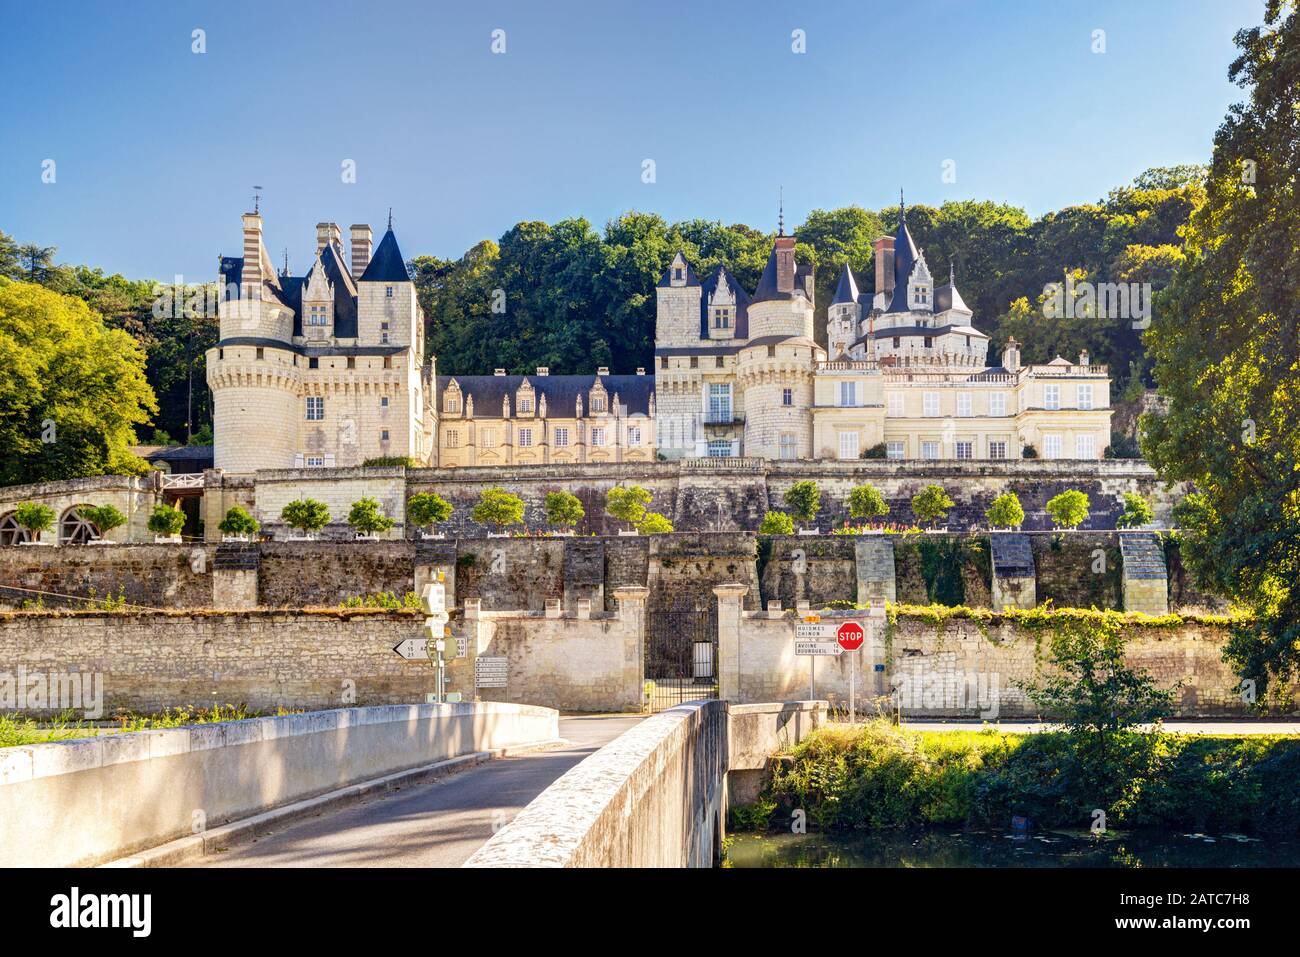 The chateau d'Usse, France. This castle is located in the Loire Valley and was built in the 15th century. Stock Photo